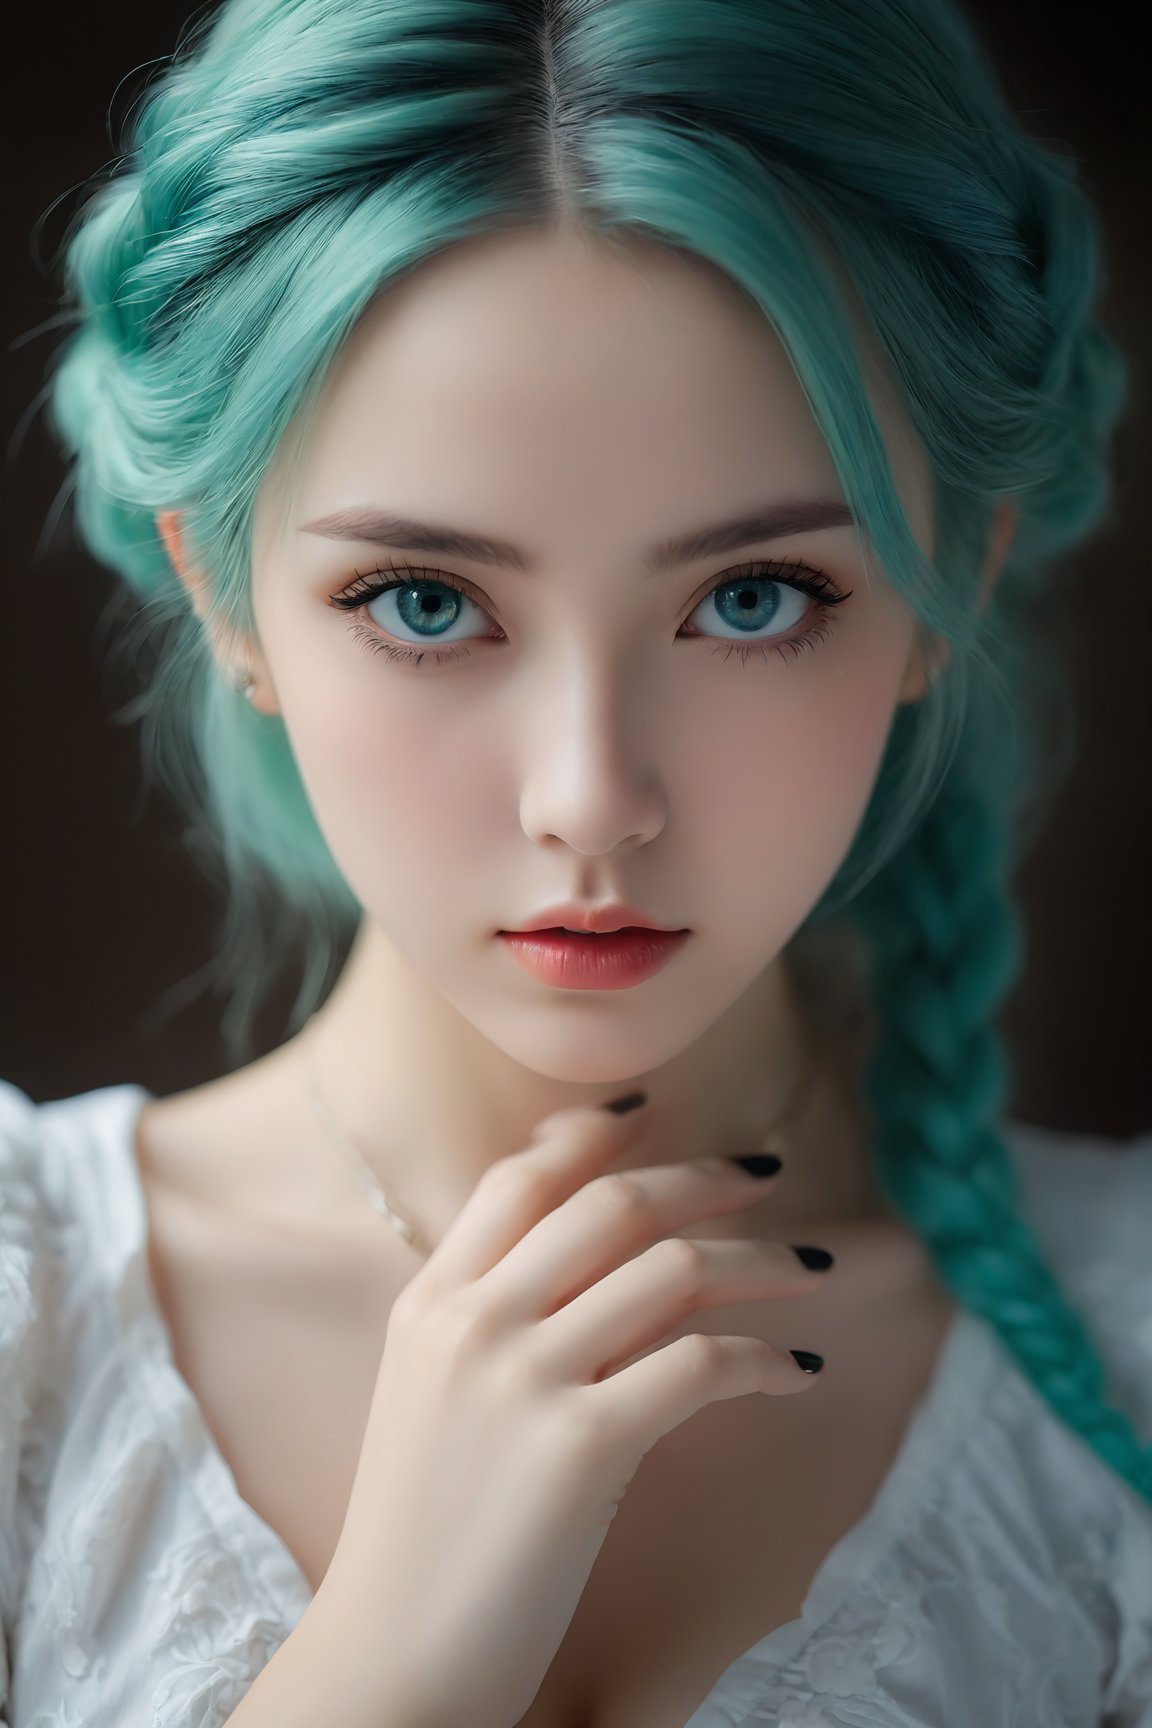 (ultra realistic,best quality),photorealistic,Extremely Realistic,in depth,cinematic light,hubggirl,BREAKstunning anime portrait of a green-haired girl with intense blue eyes, close-up view, intricate hand details, braided hair, white clothing, strong light and shadow contrasts, black nails, 21 years old, BREAKdynamic poses, particle effects, perfect hands, perfect lighting, vibrant colors, intricate details, high detailed skin, intricate background, realistic, raw, analog, taken by Sony Alpha 7R IV, Zeiss Otus 85mm F1.4, ISO 100 Shutter Speed 1/400, Vivid picture, More Reasonable Details <lora:HUBG Hyper SDXL_lora :0.8>